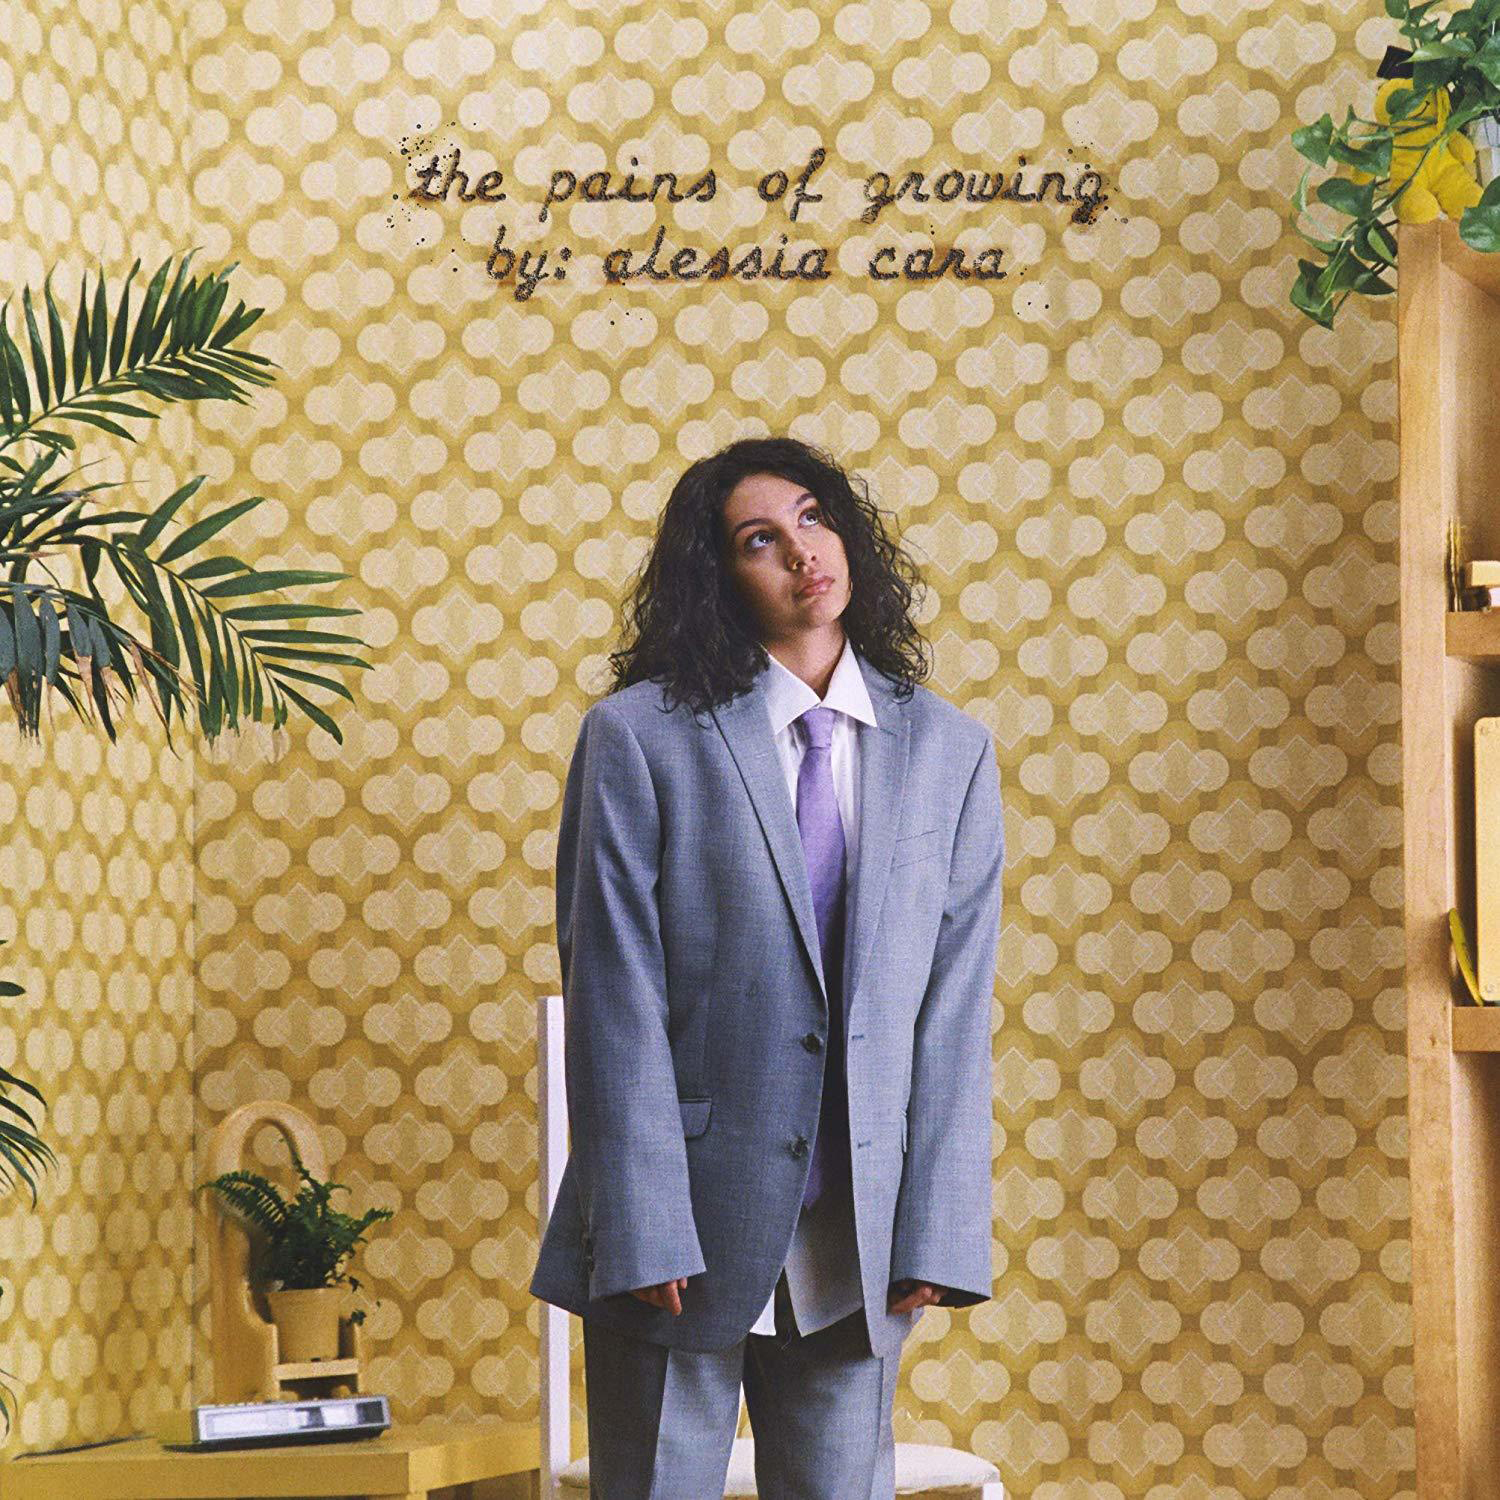 Alessia Cara - The og Growing (CD) Pains 